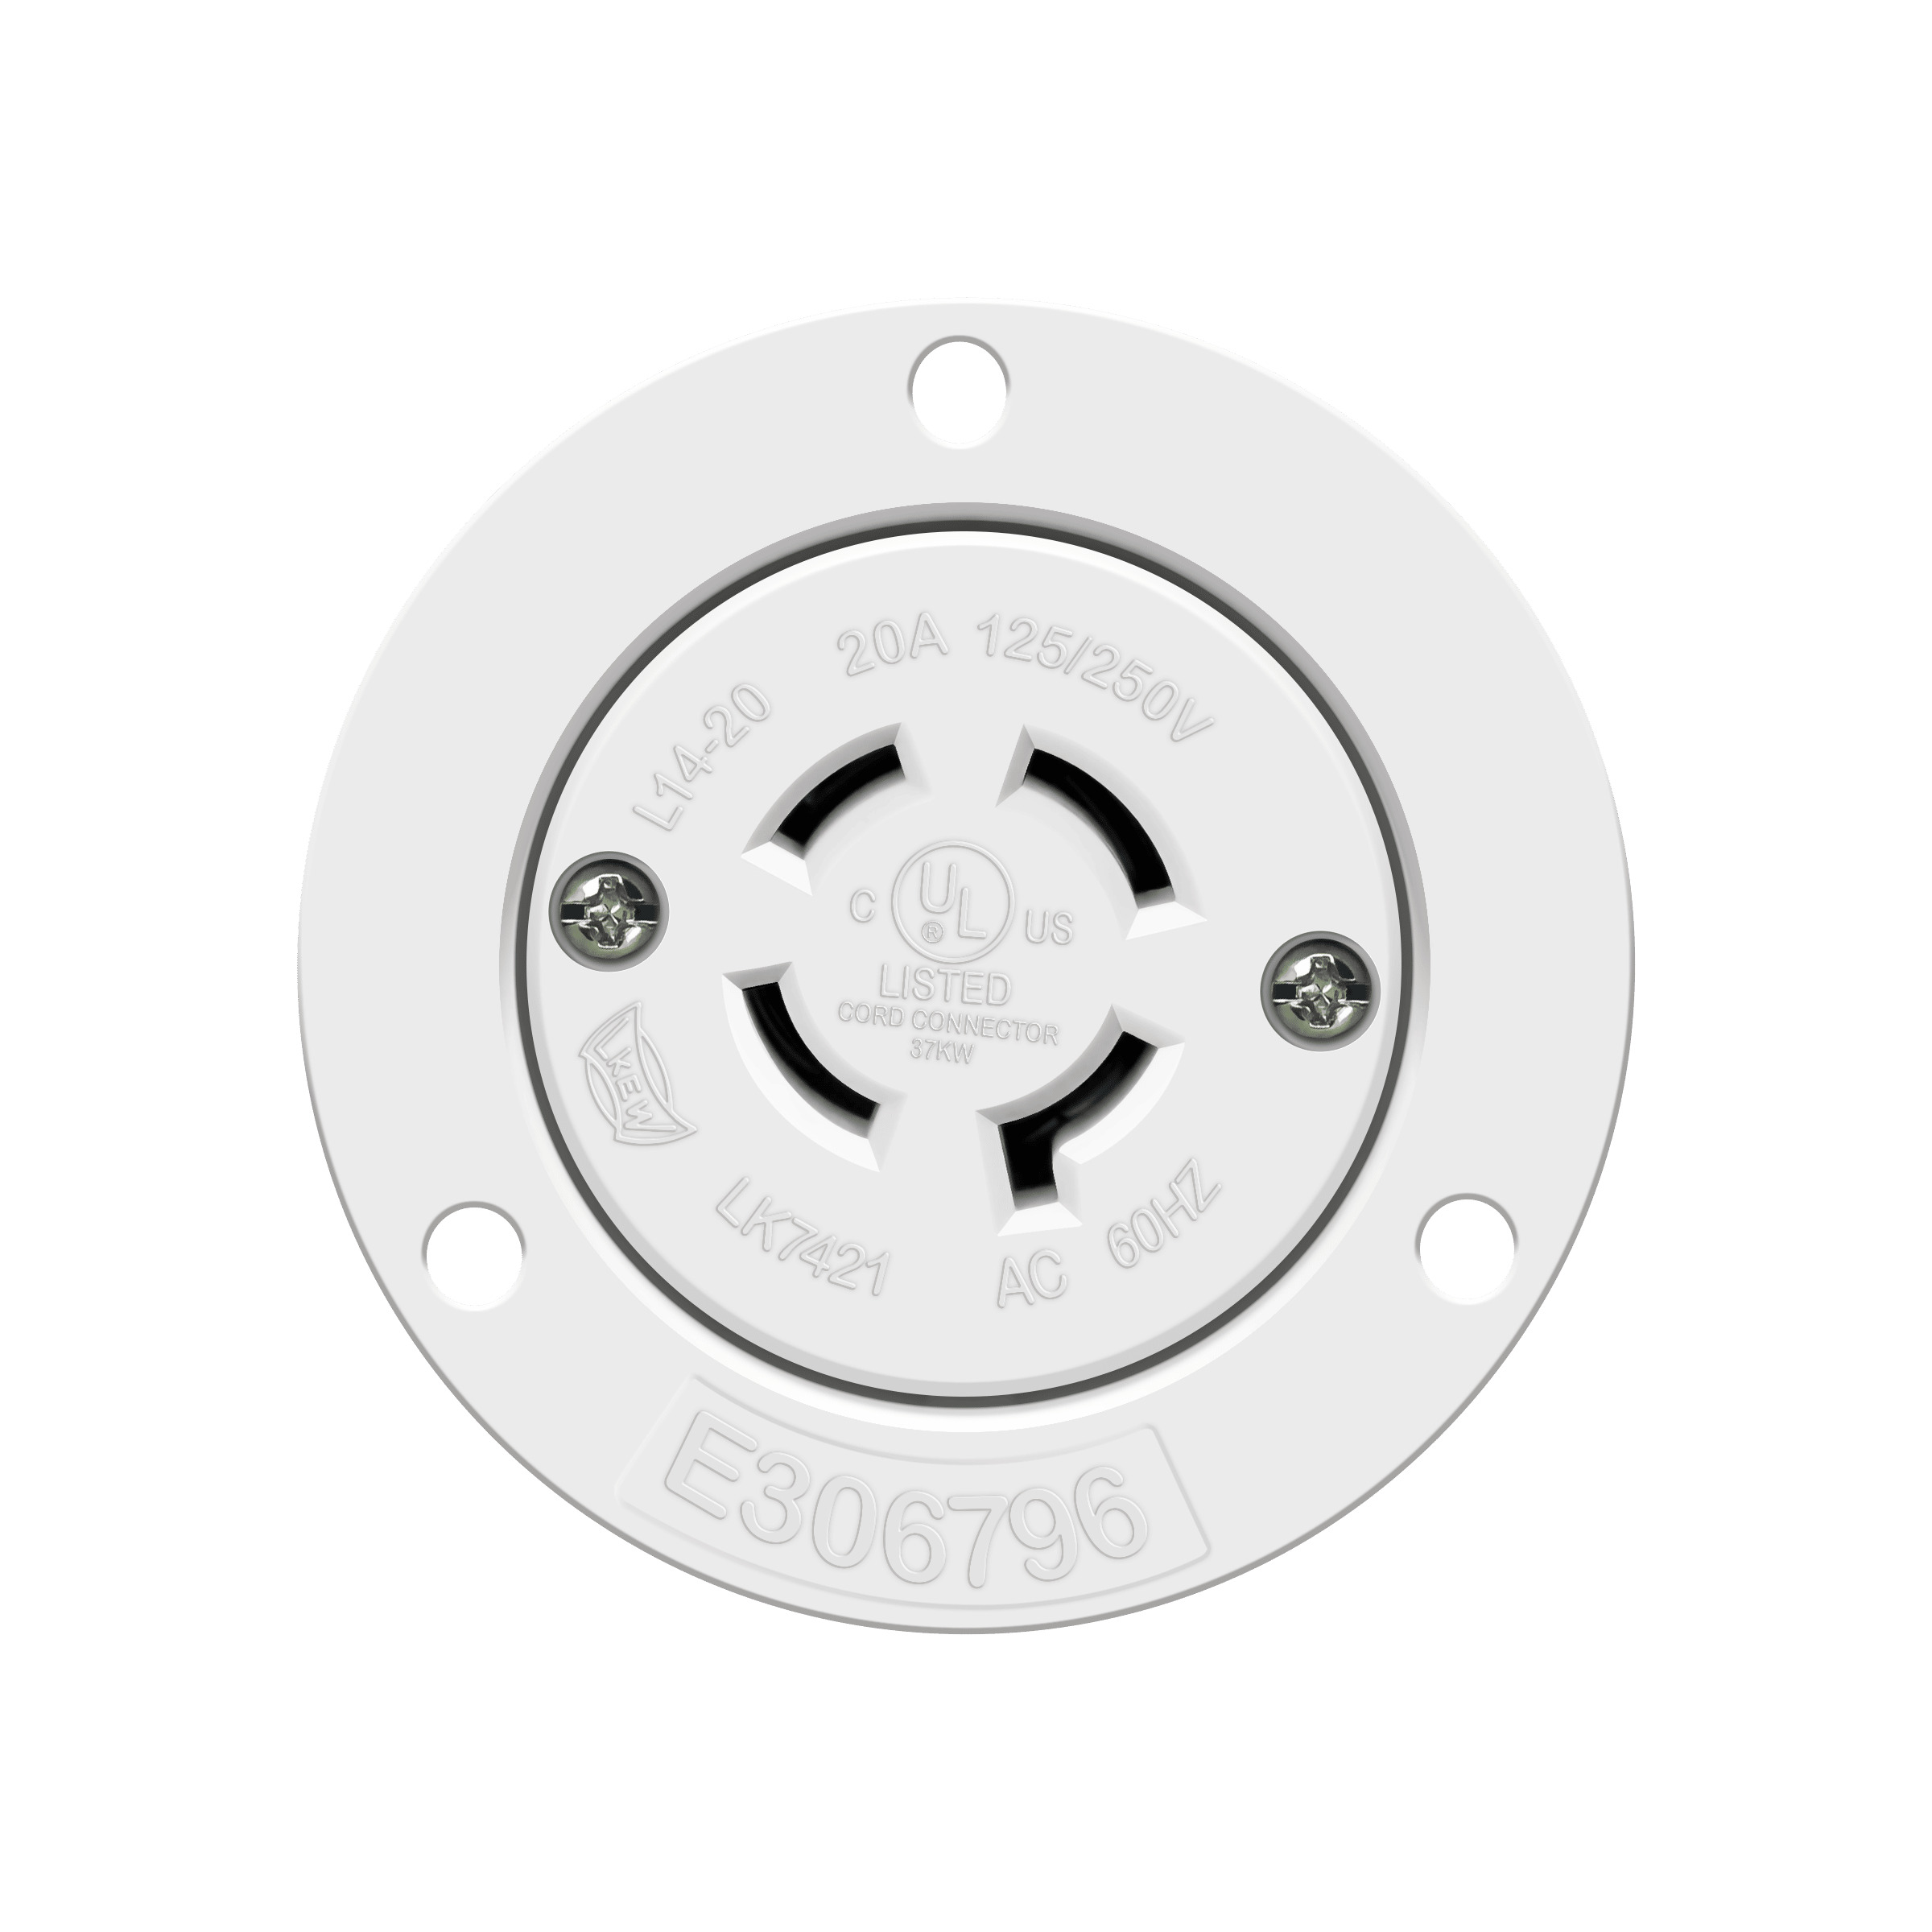 NEMA L14-20 Flanged Outlet Locking Plug Charger Receptacle 20 Amp White